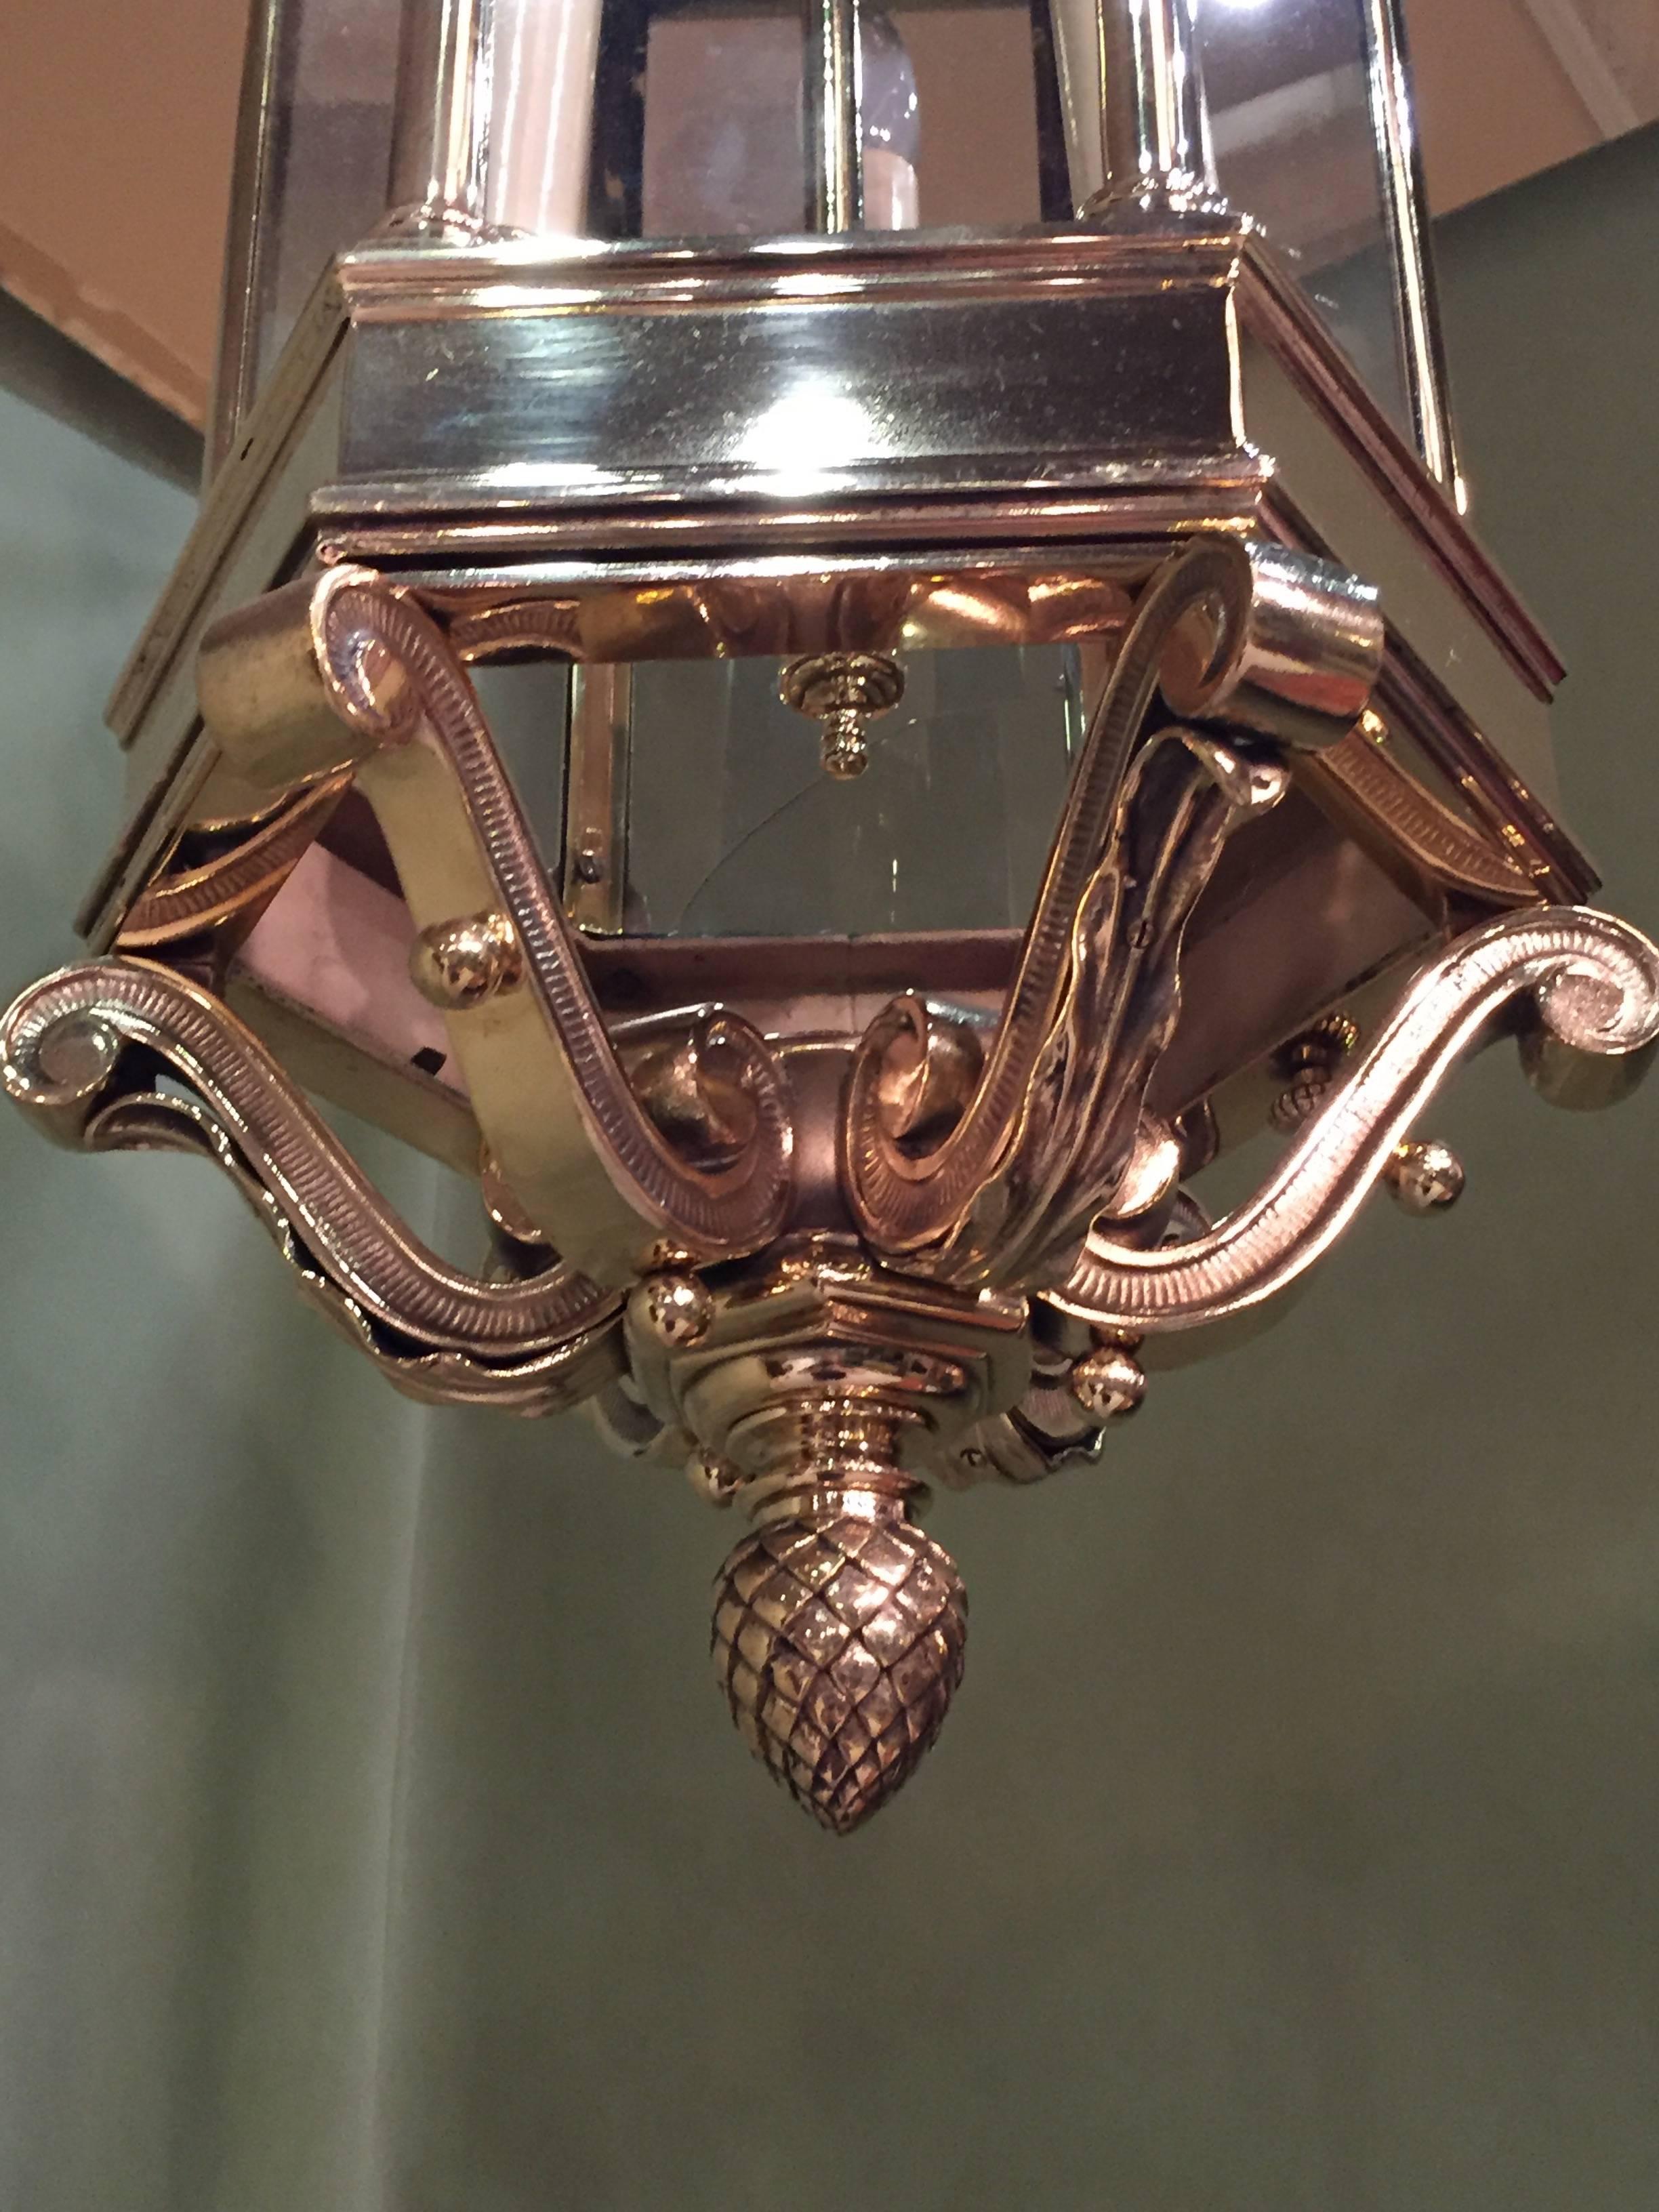 English late 19th century hall lantern with heavy cast brass detail on base. Rewired and UL listed sockets.